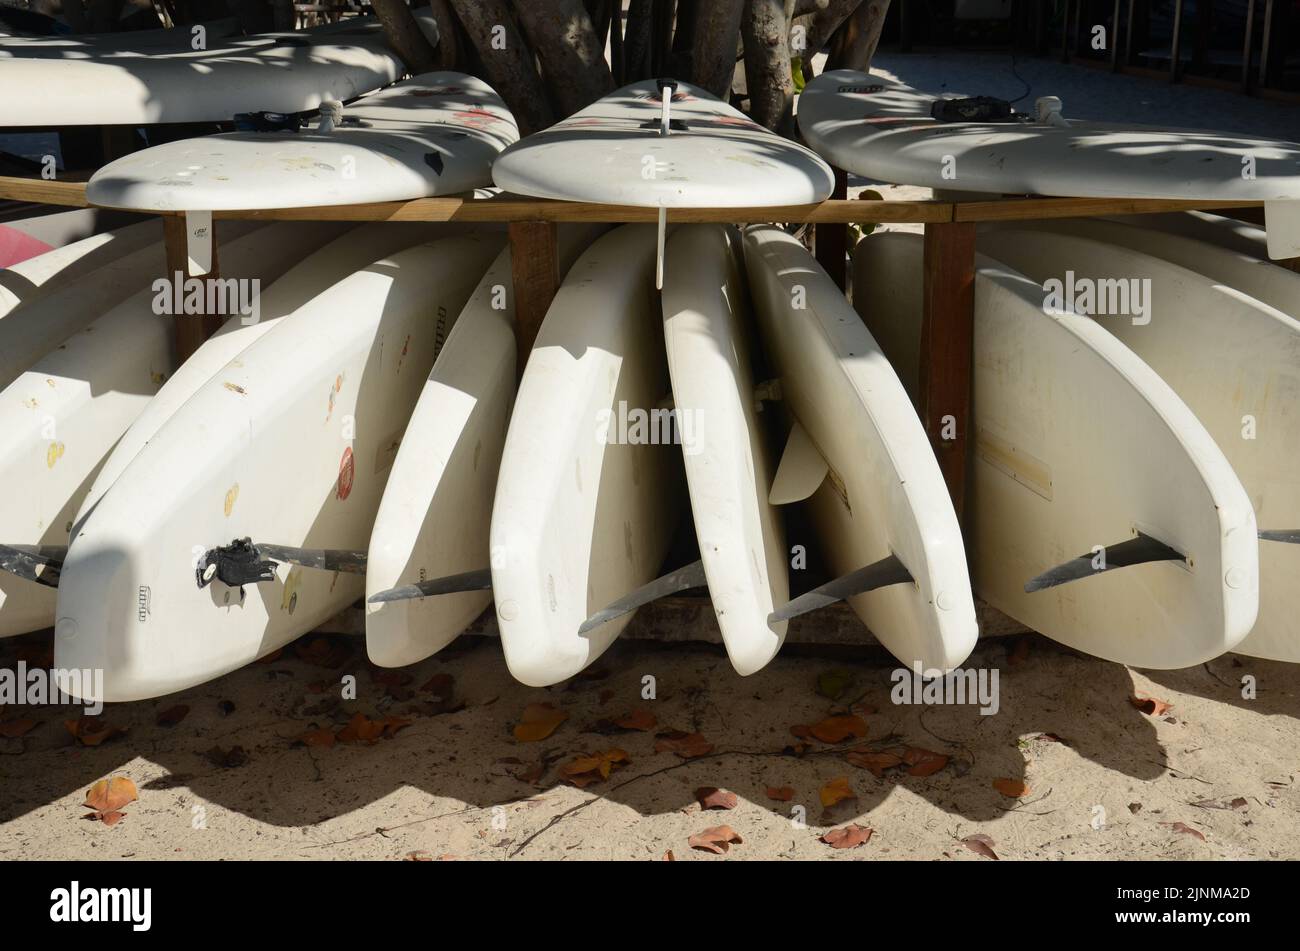 A closeup shot of white surfing boards on the beach Stock Photo